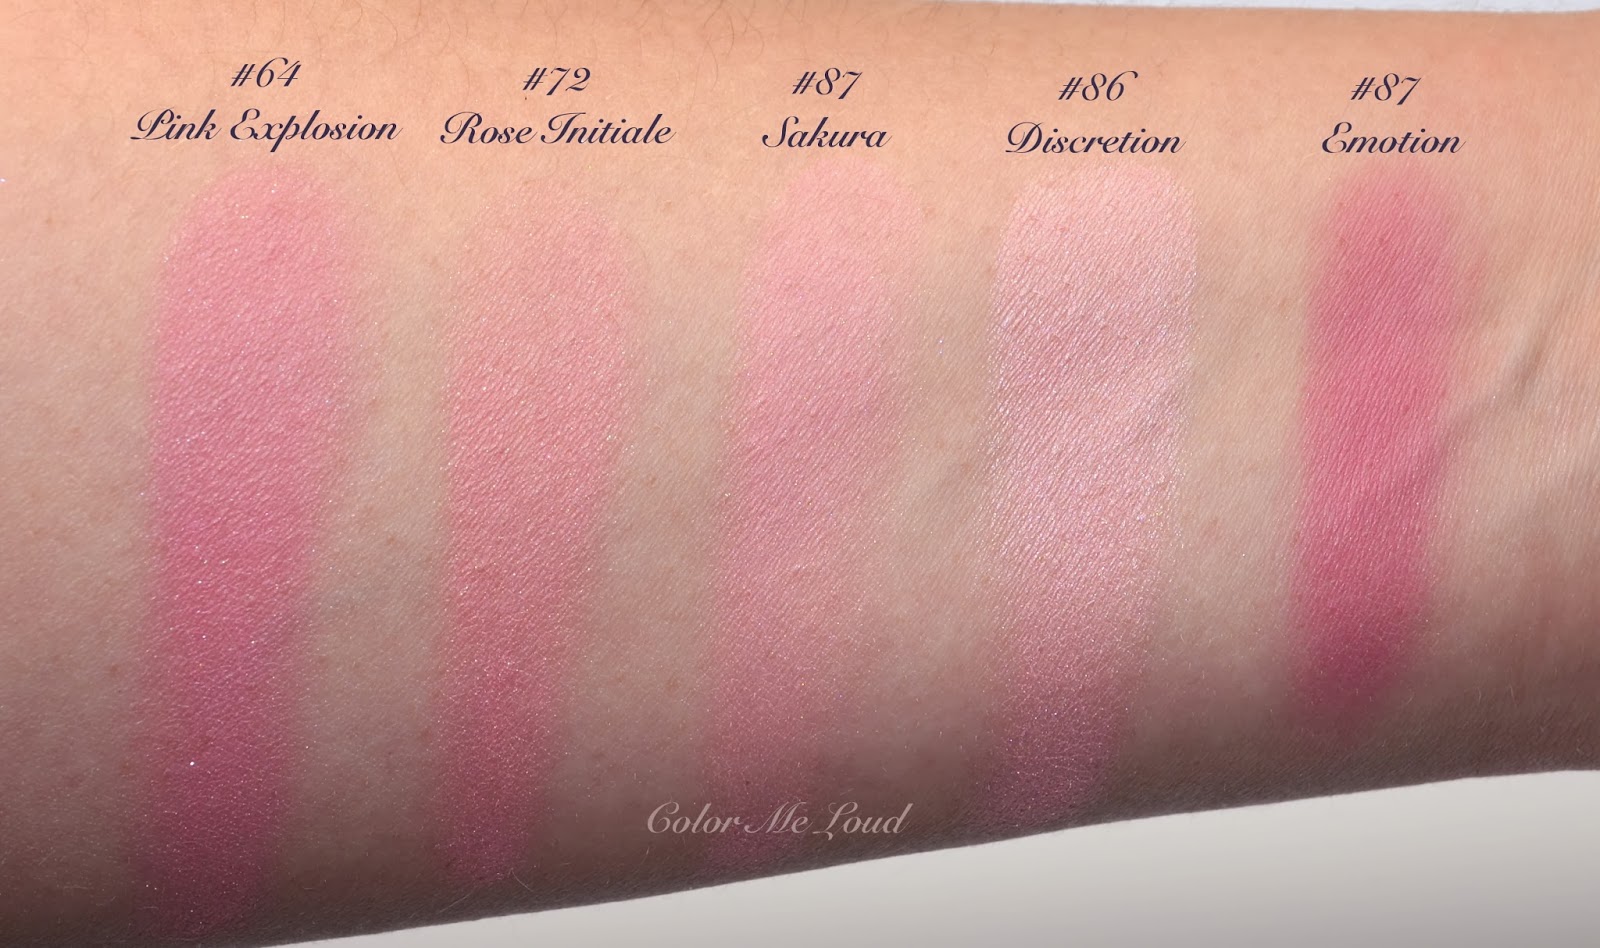 Chanel Le Blush Cream De Chanel Swatches - of Faces and Fingers